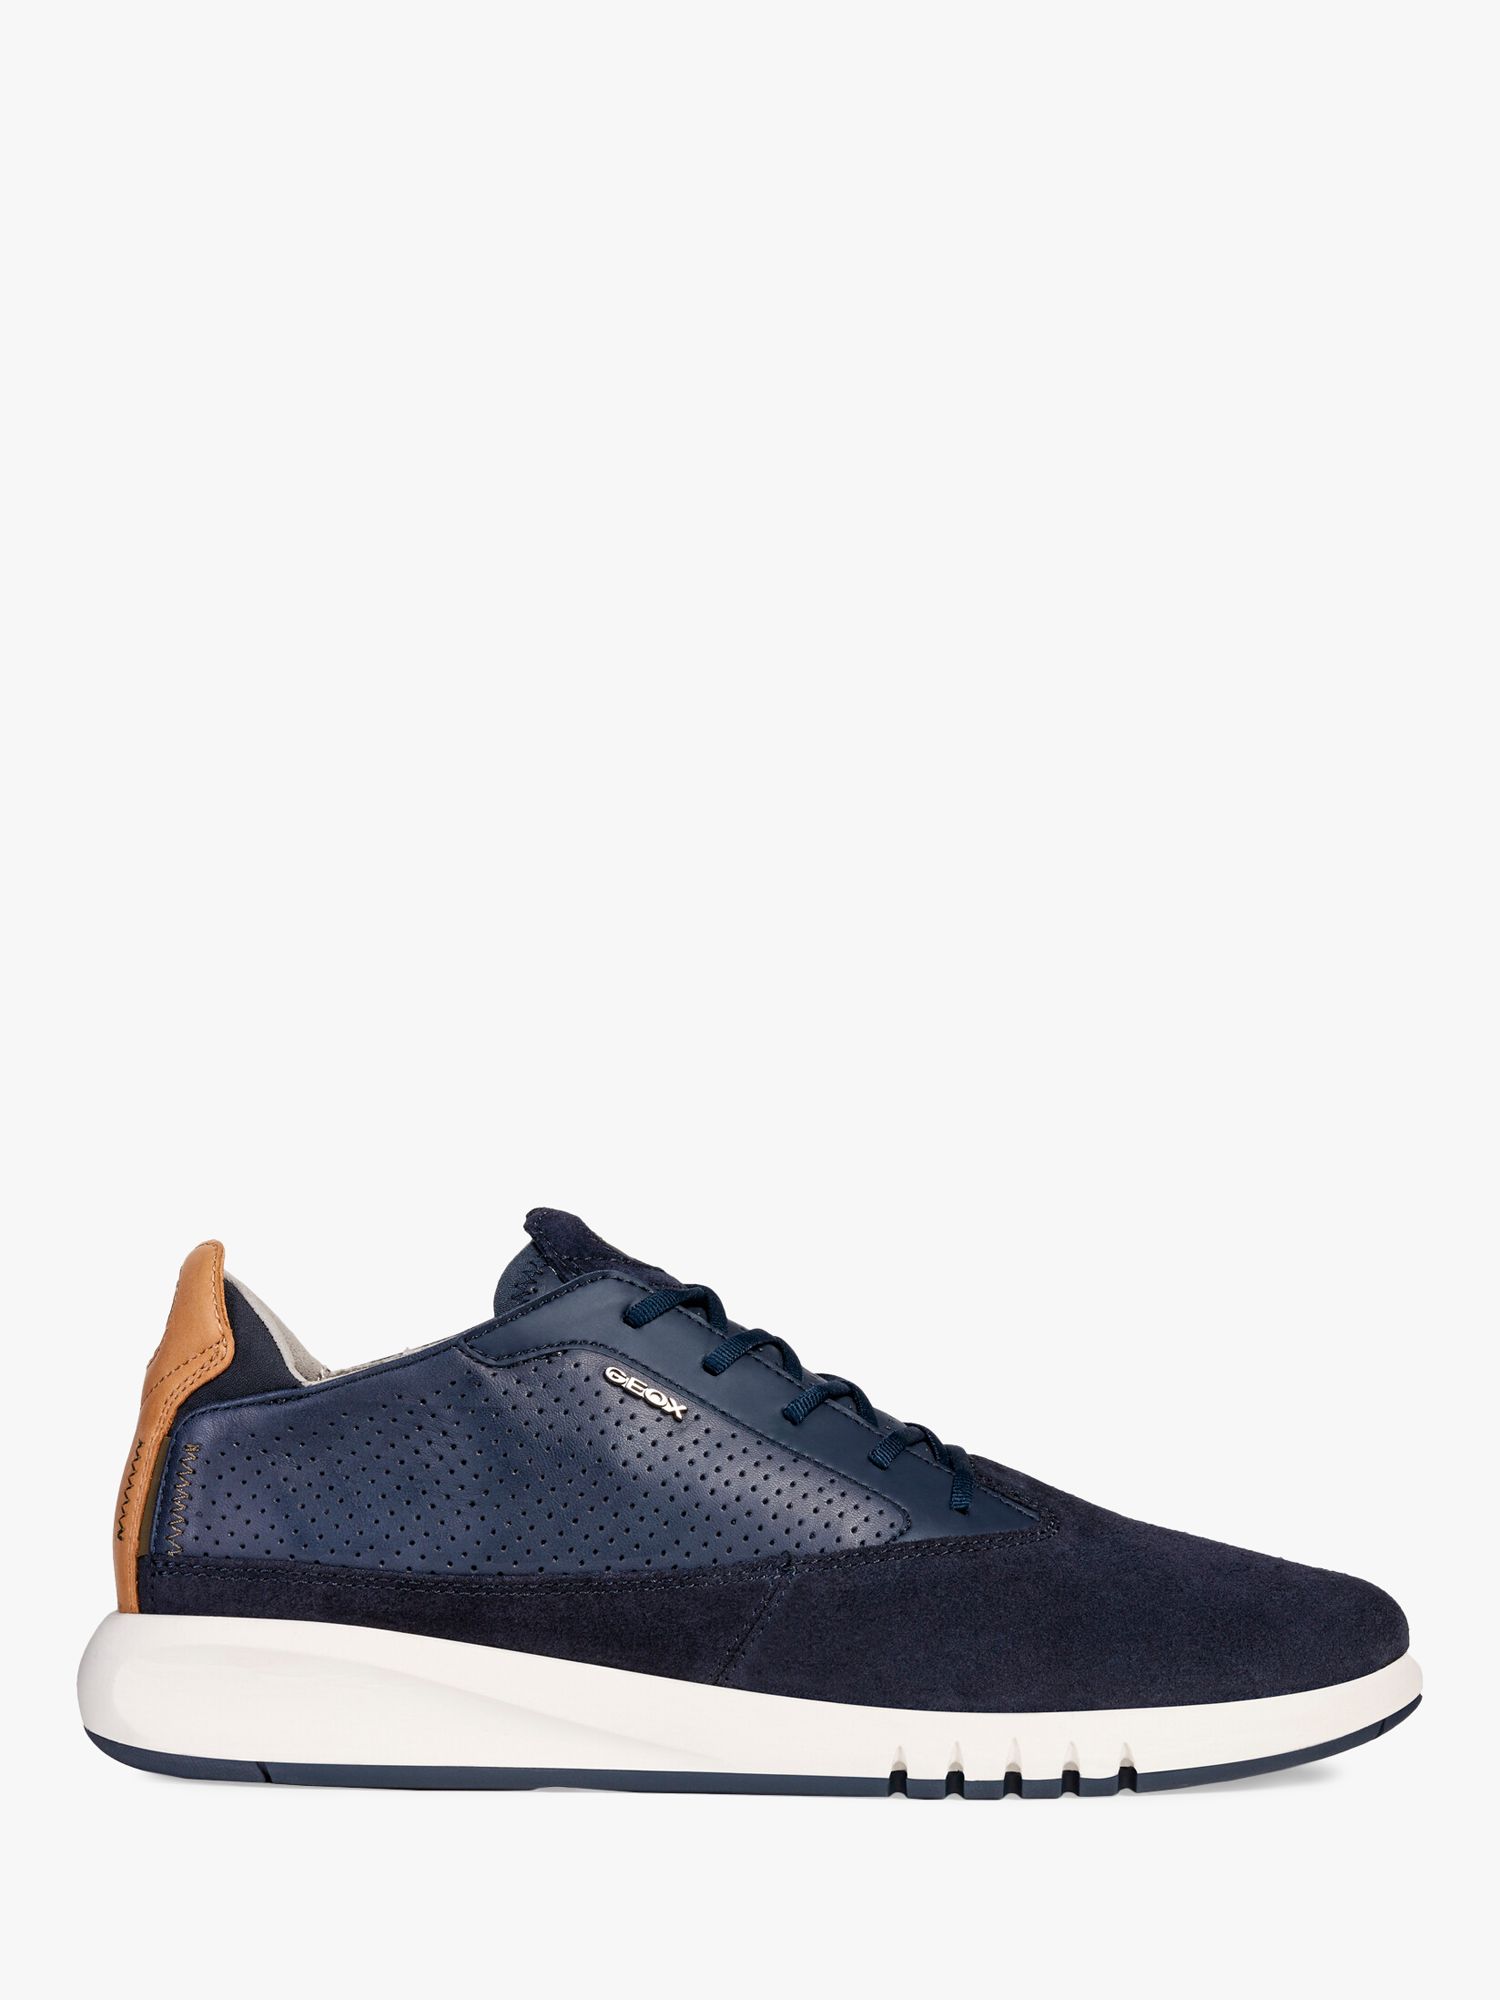 Geox Aerantis Leather Trainers, Blue at John Lewis & Partners